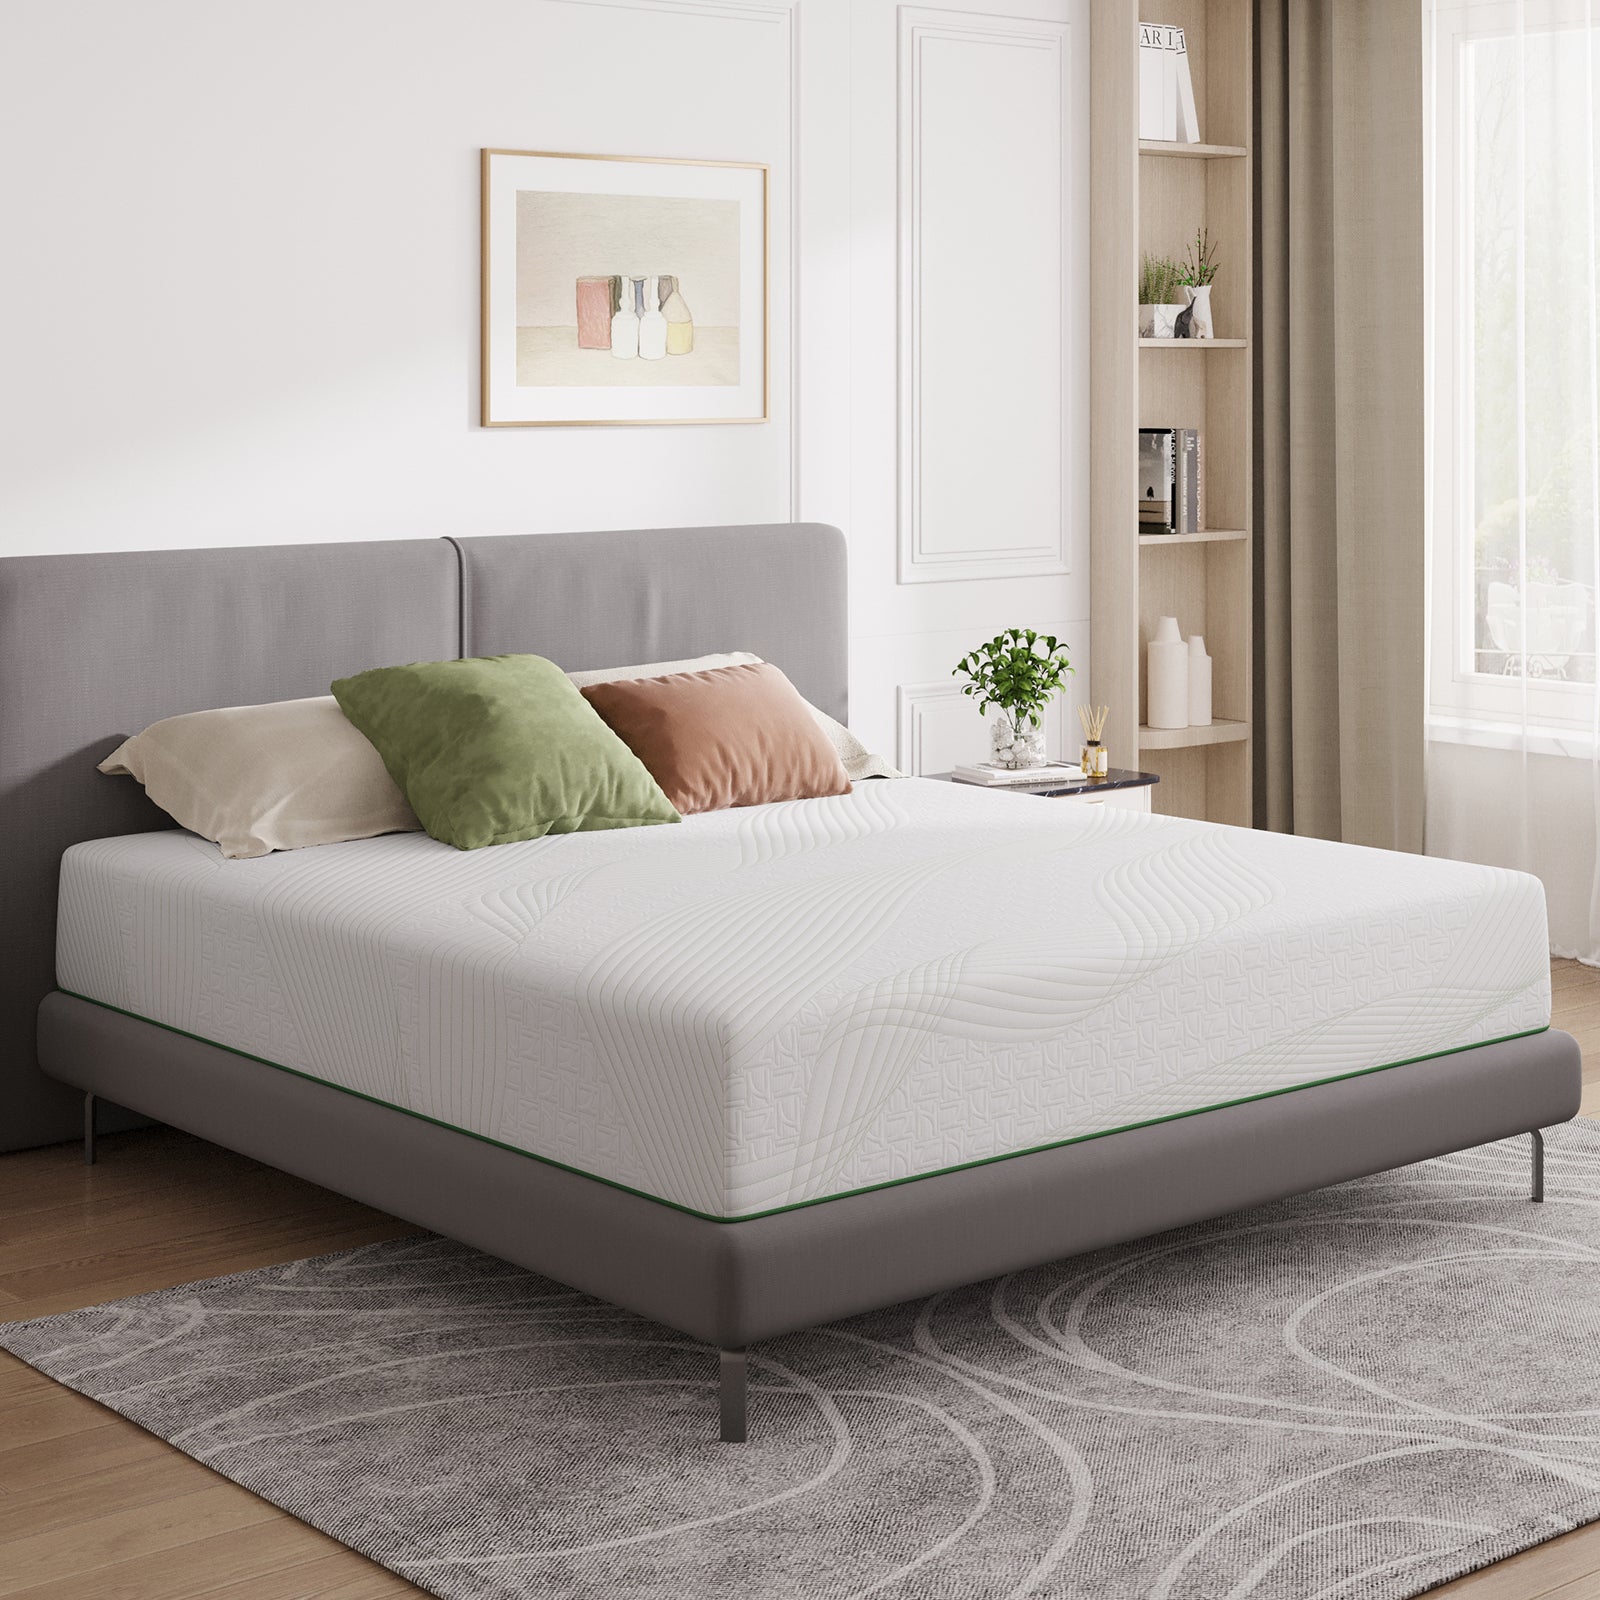 6 Methods to Disinfect and Sanitize Your Mattress